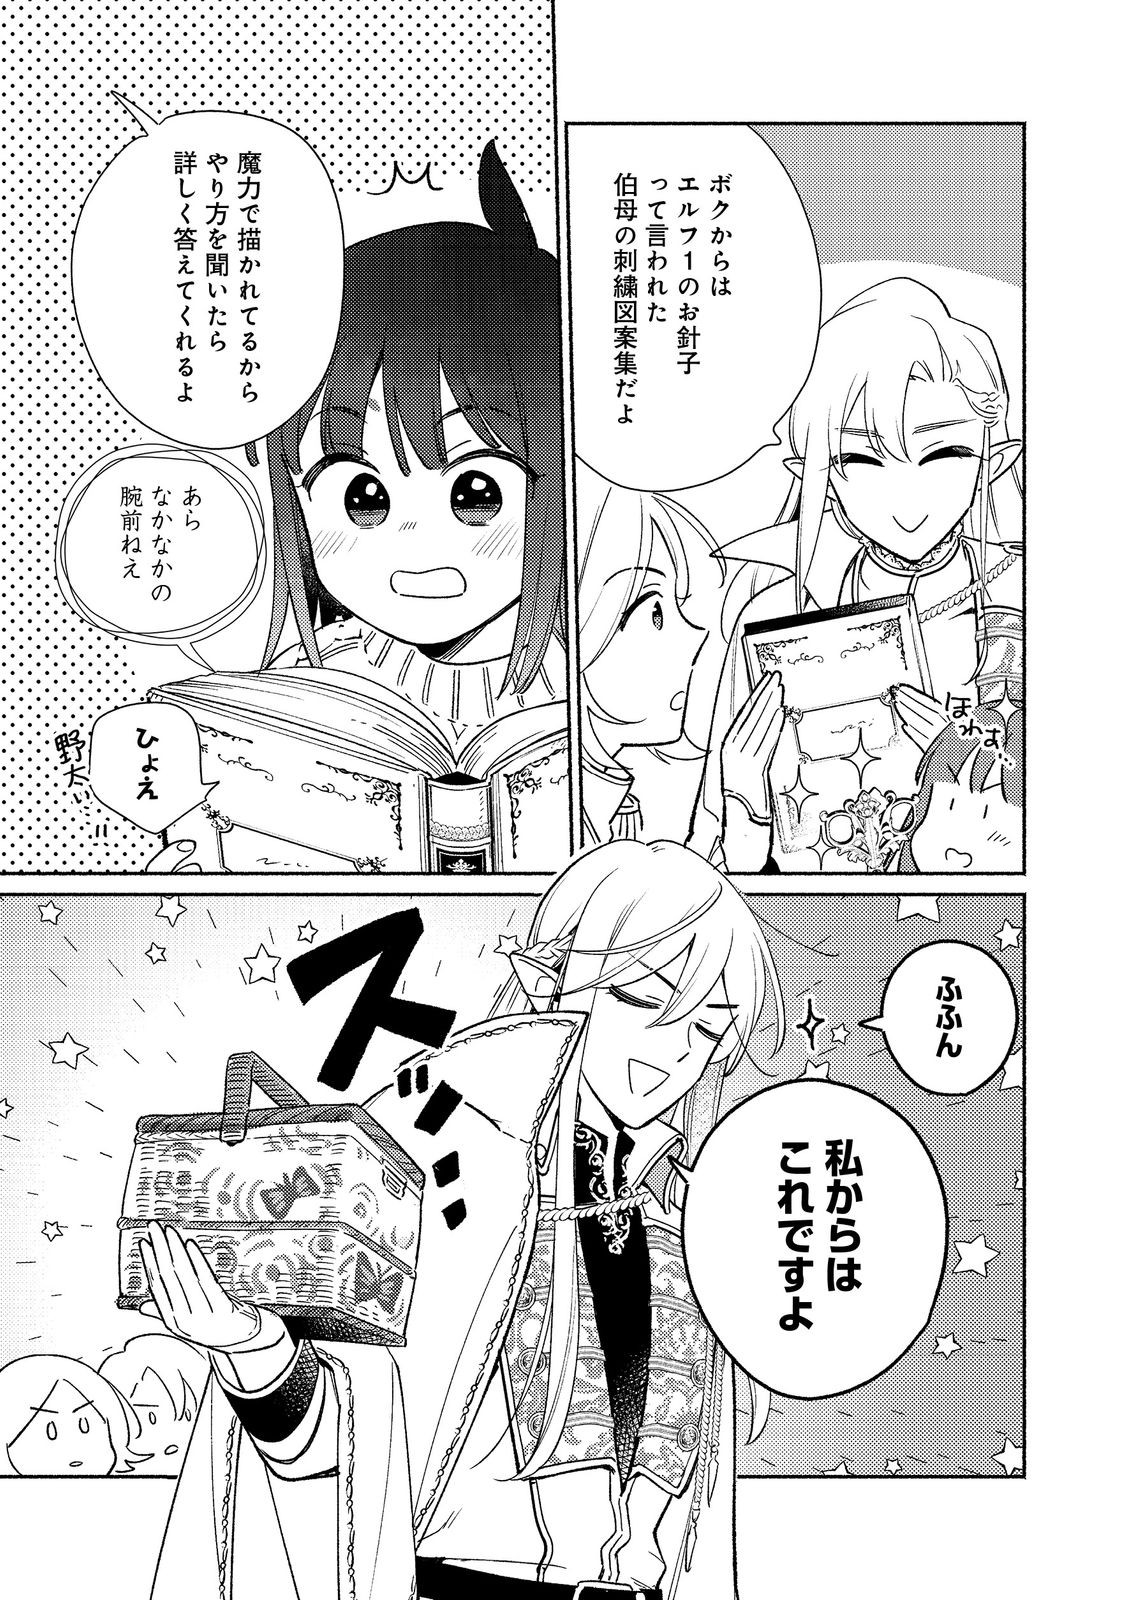 I’m the White Pig Nobleman 第26.2話 - Page 2